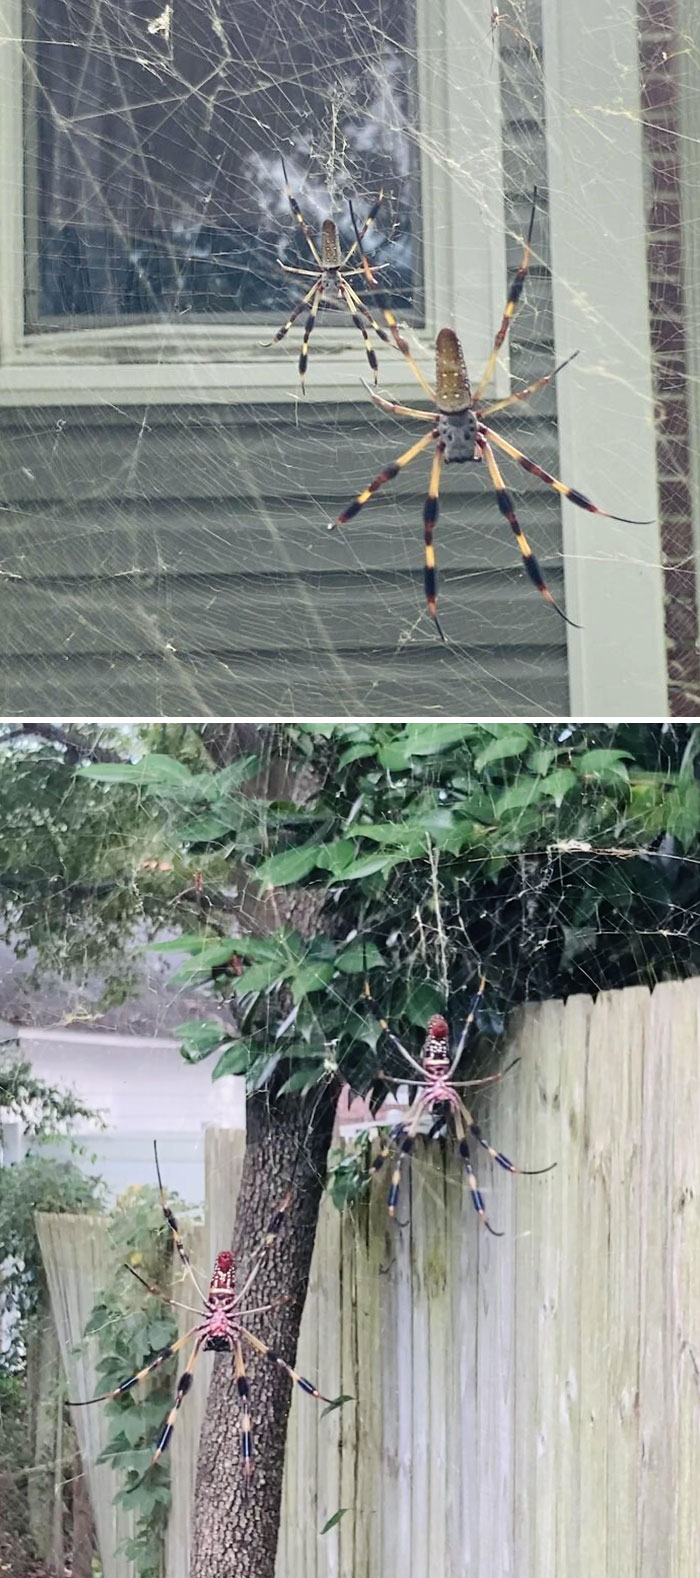 These Golden Orb Weavers Next To My Trash Can. About The Size Of My Palm